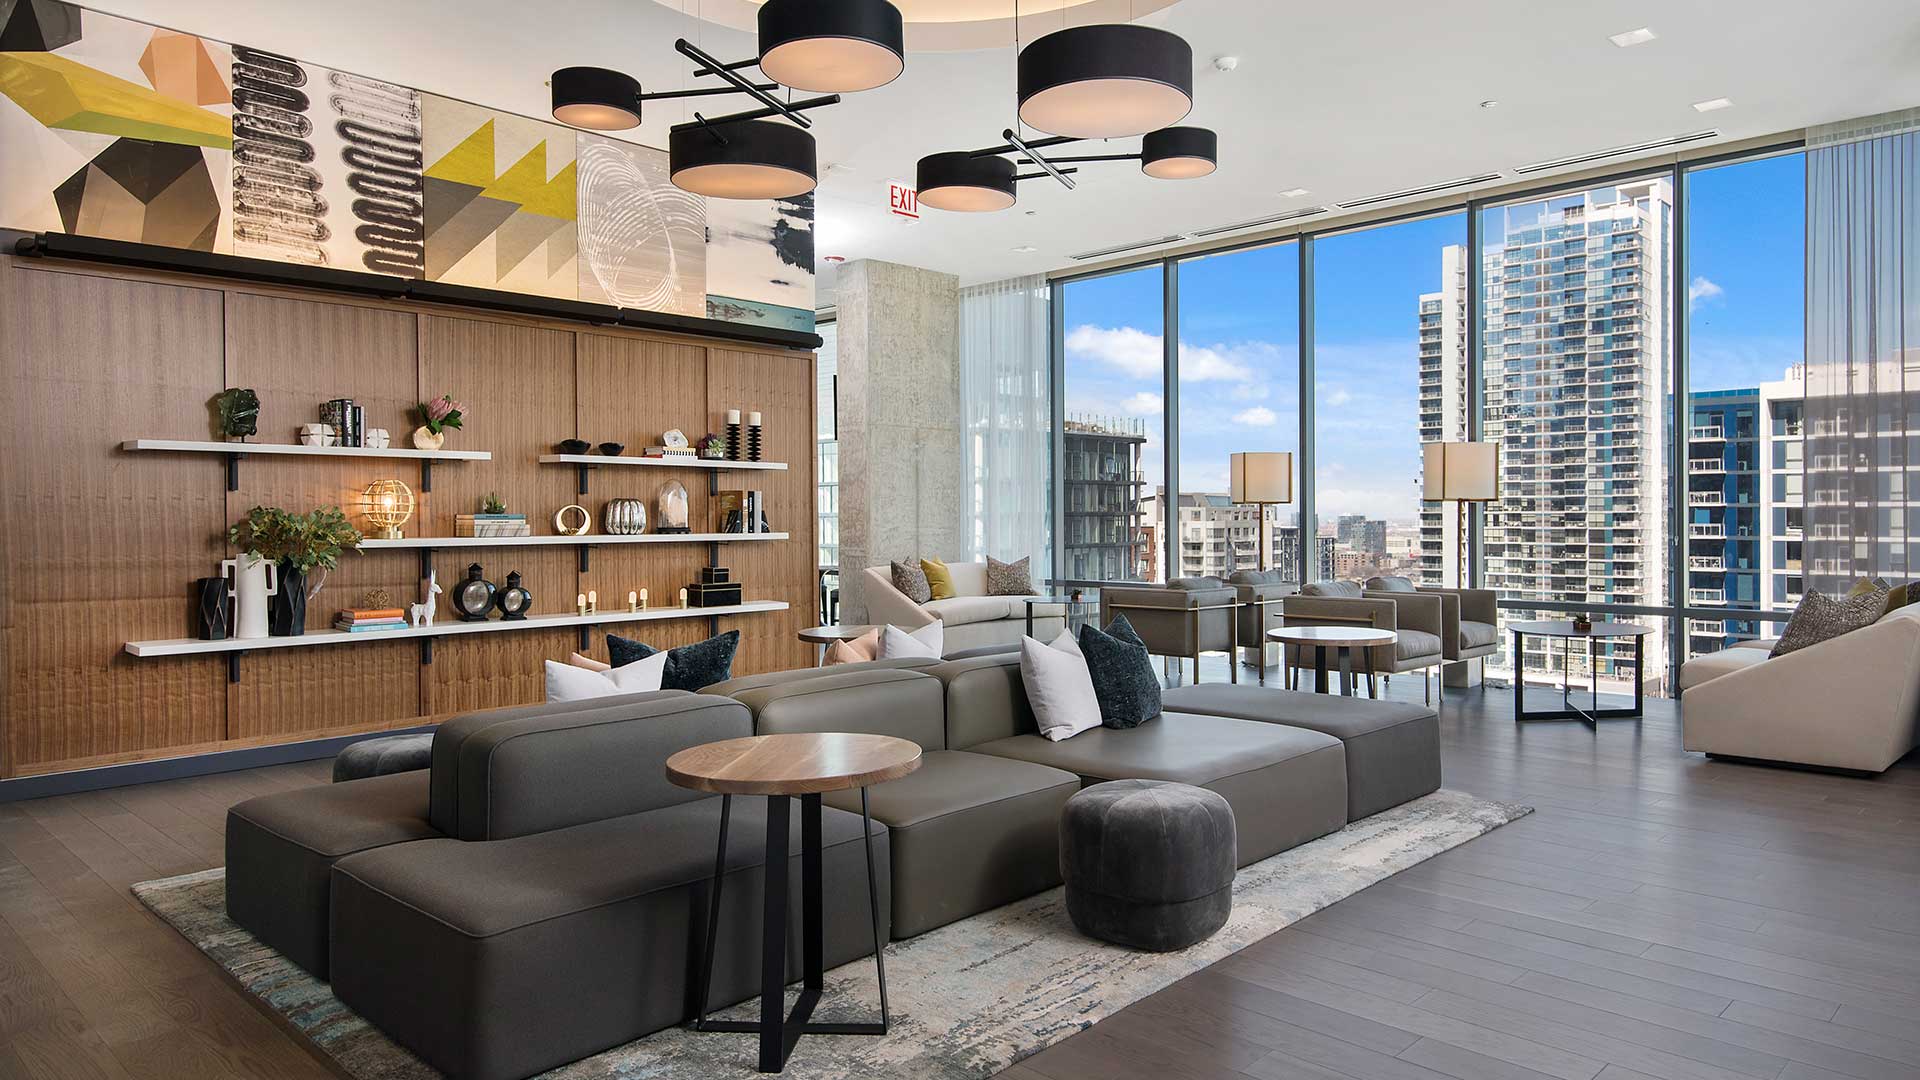 The main lounge area of the Hubbard221 amenity deck. A large section couch is in the middle with seating on both sides. Behind it is a series of wall-mounted shelves with various décor. To the right are smaller seating areas along the floor-to-ceiling windows.